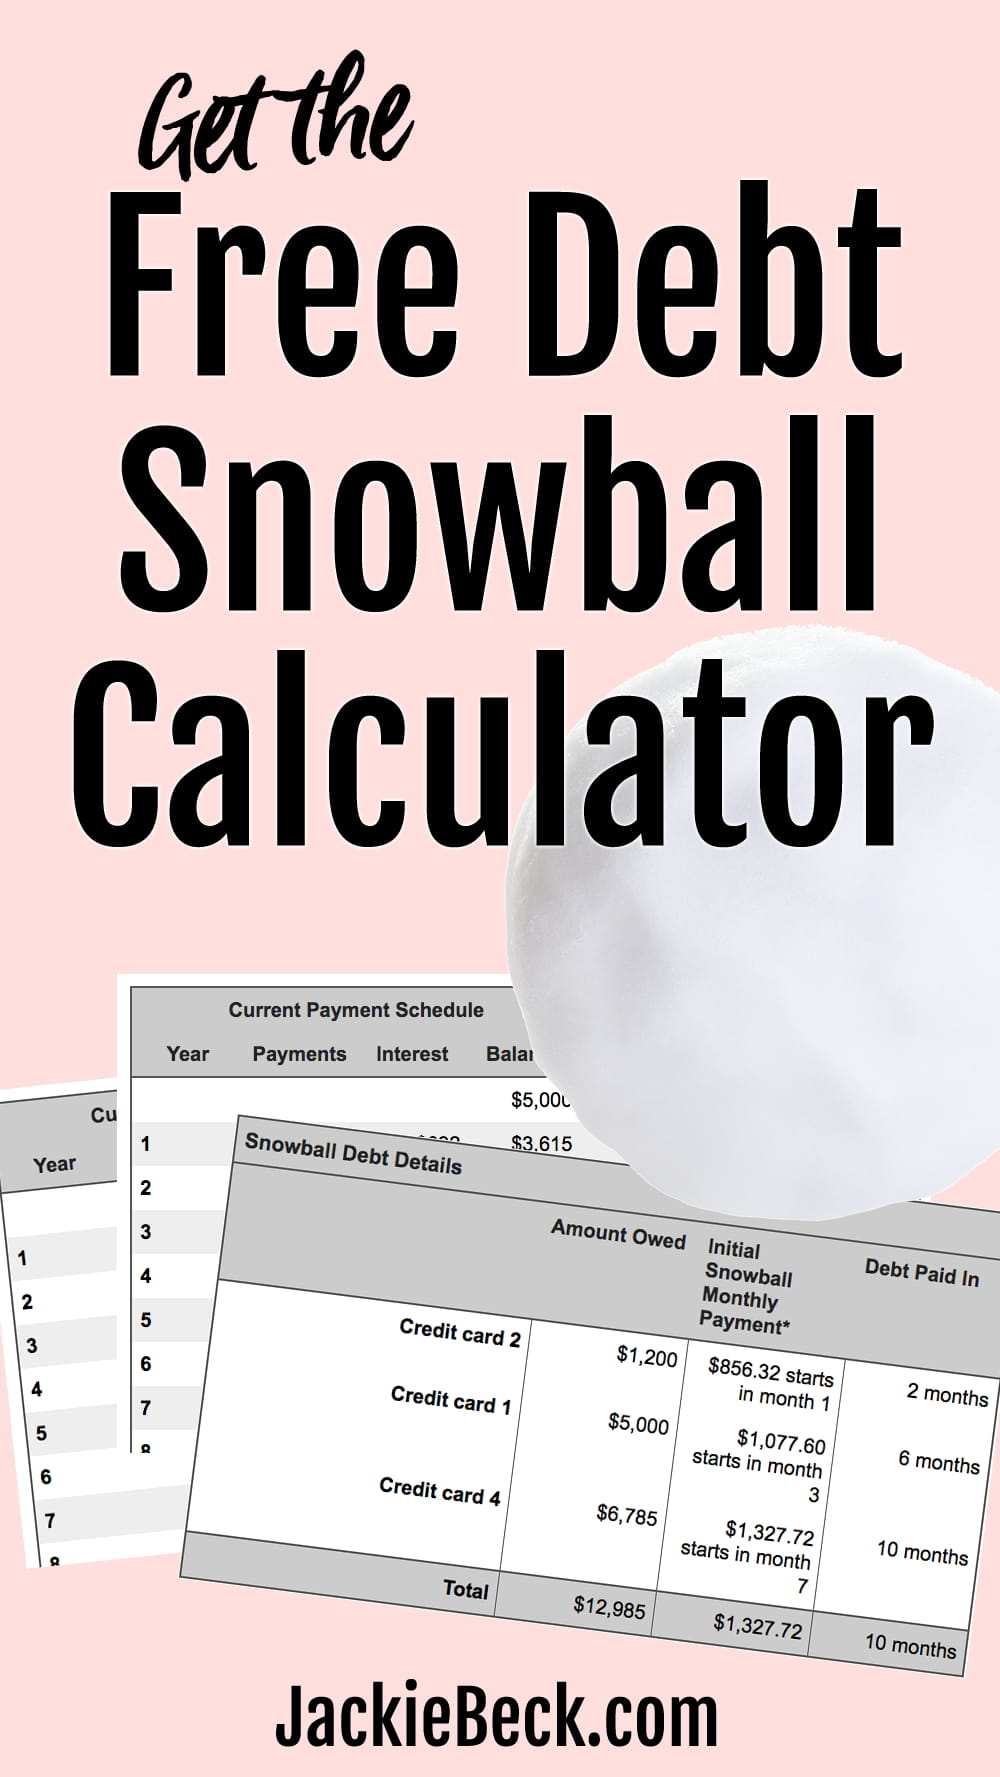 This free debt snowball calculator is a snap to use. It will show you how quickly you can become debt free, and more!